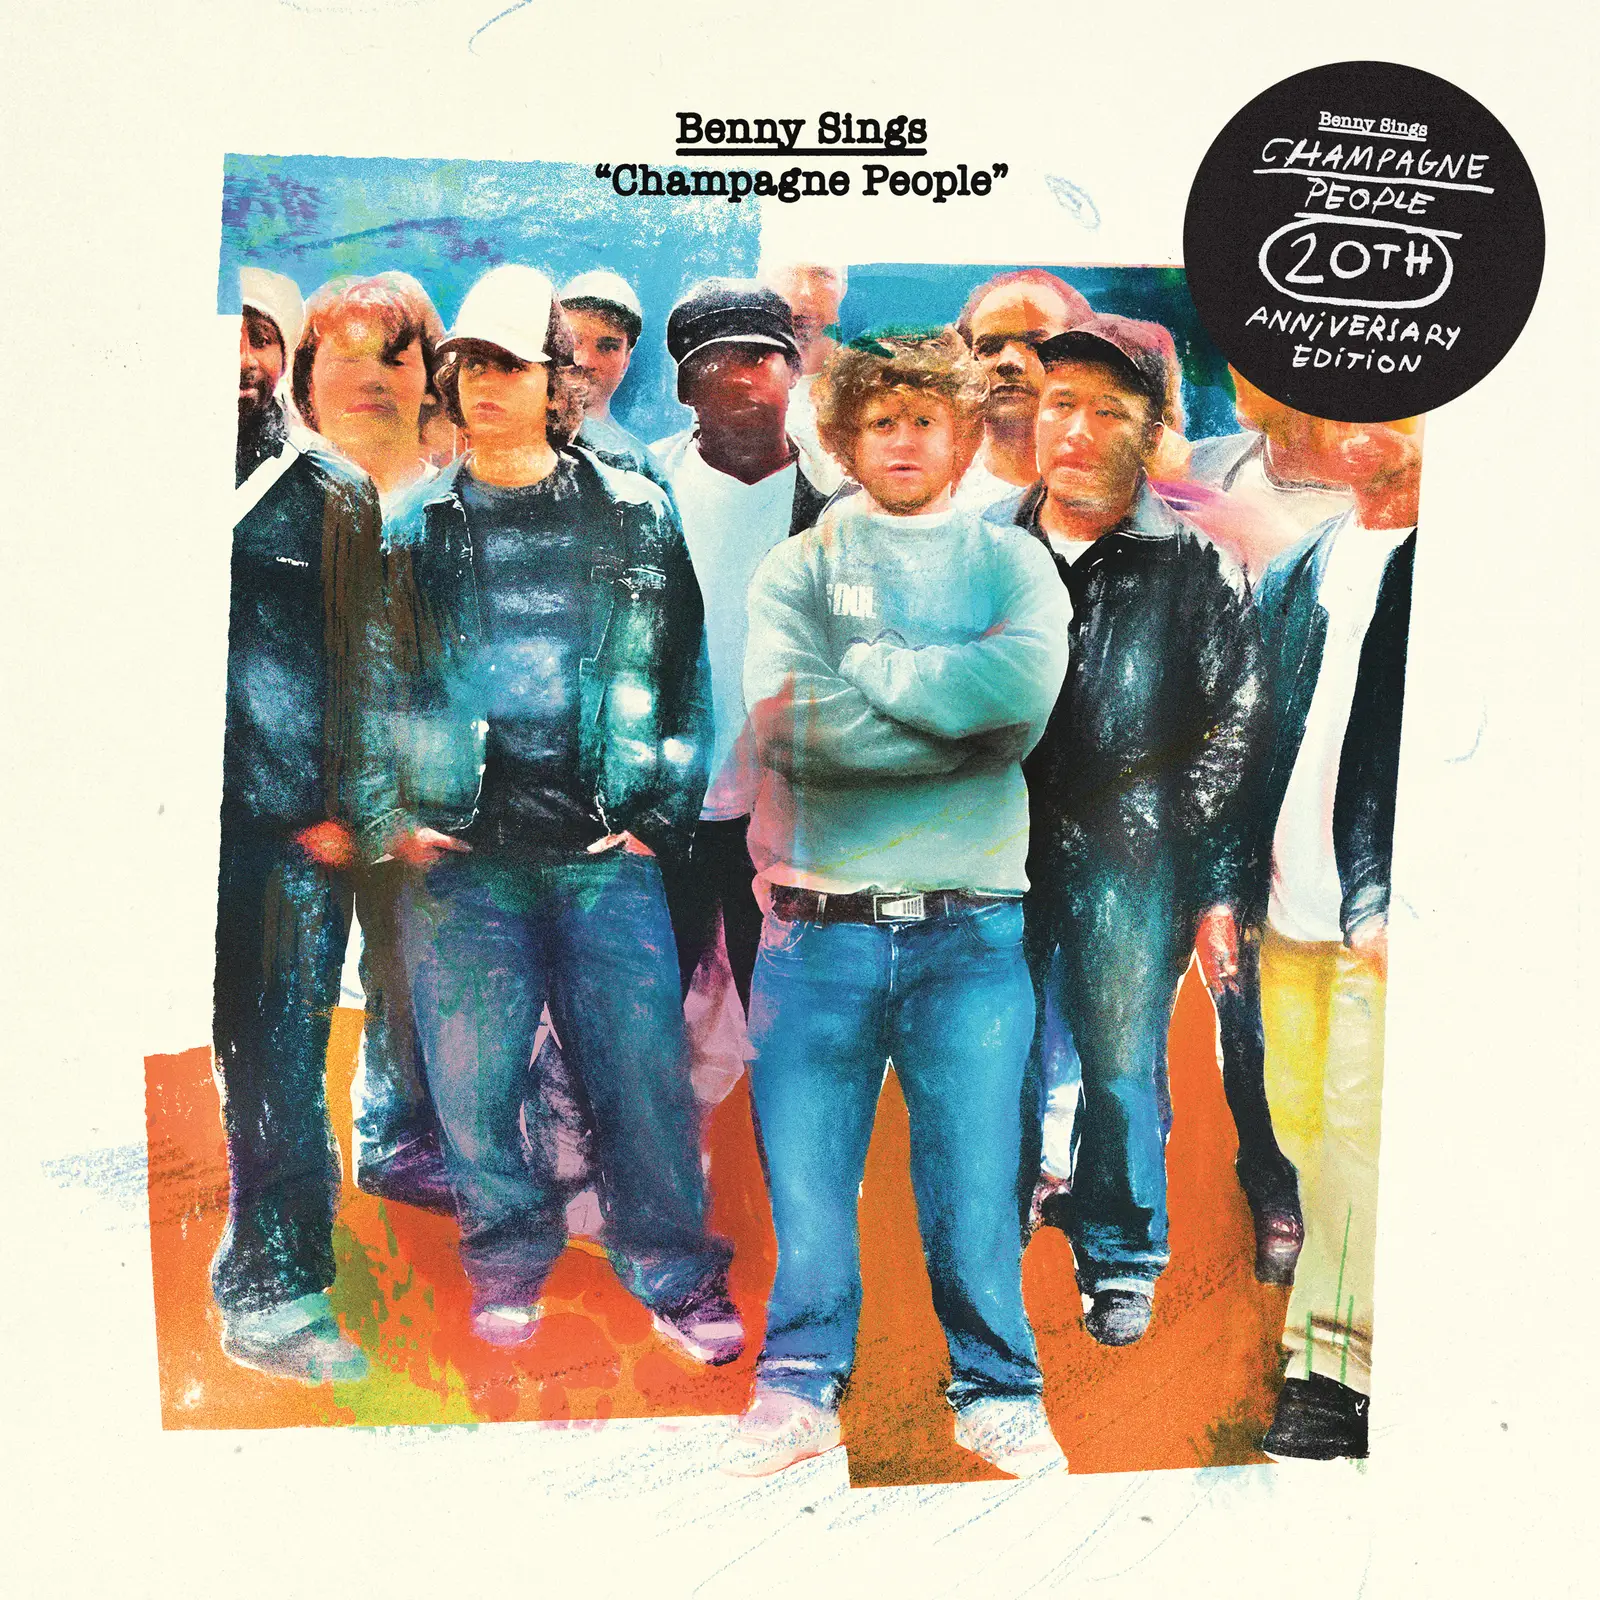 <strong>Benny Sings - Champagne People (20th Anniversary Edition)</strong> (Vinyl LP - black)